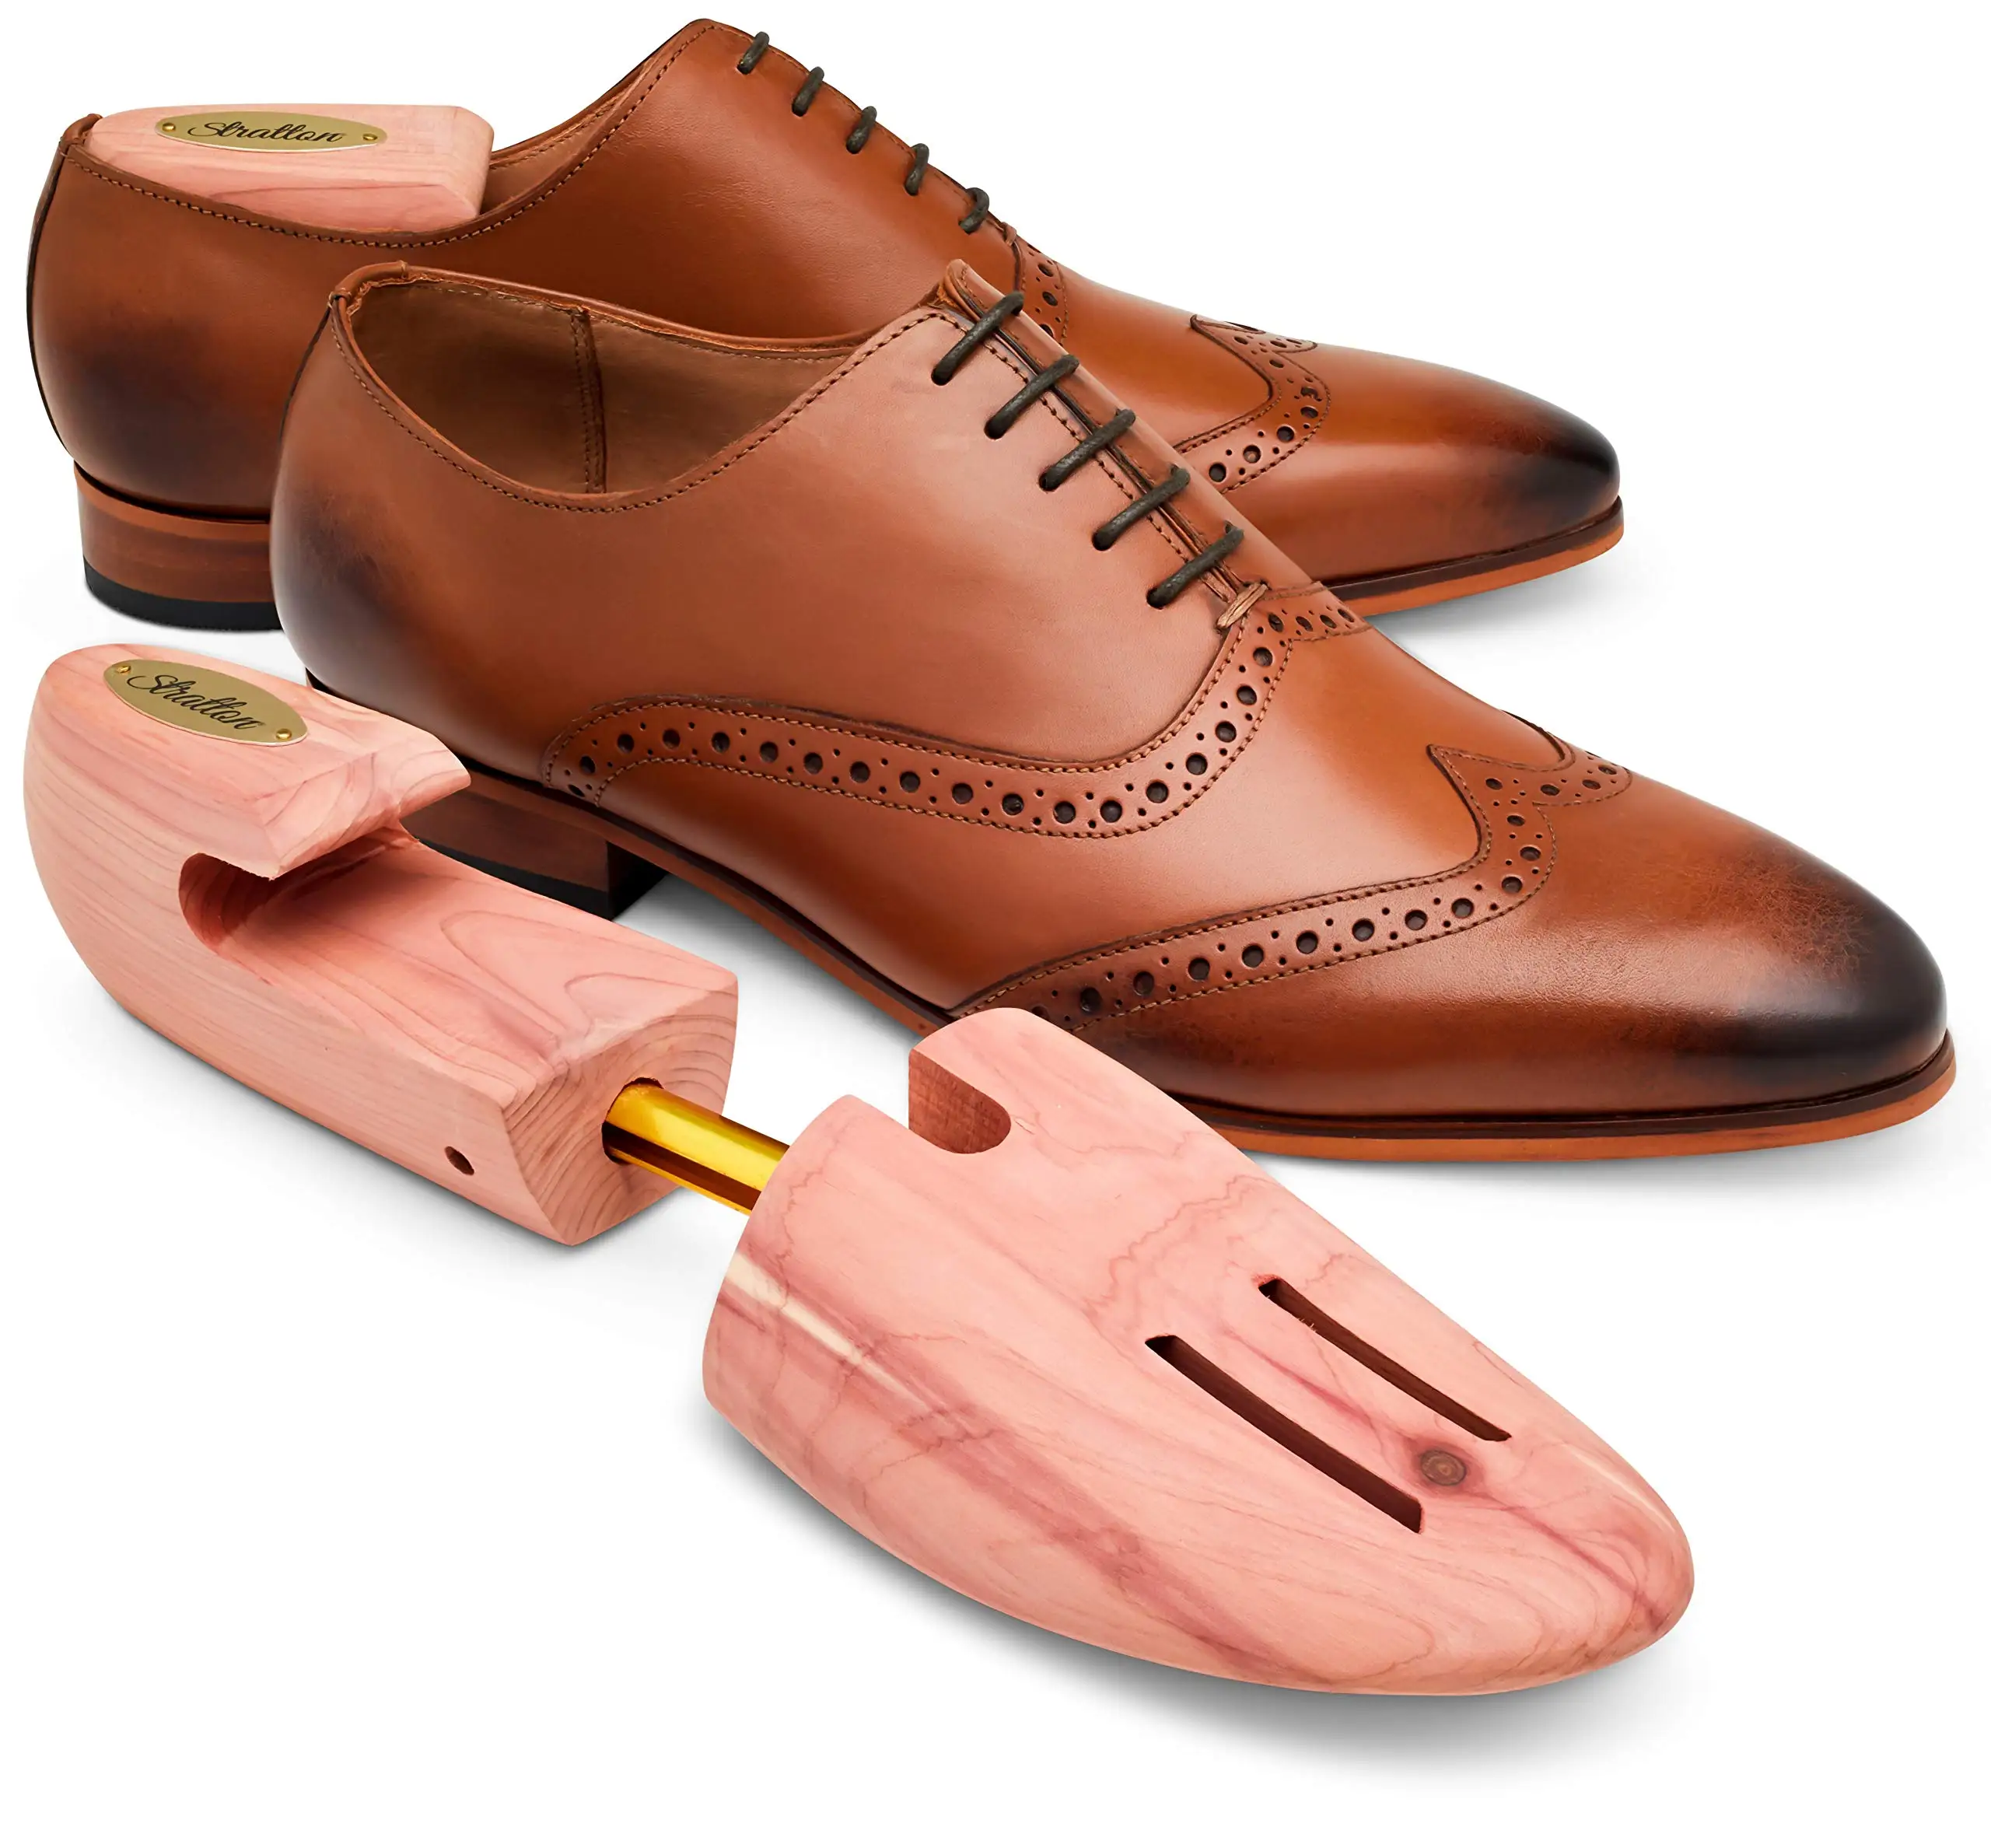 GROWN IN USA STRATTON CEDAR SHOE TREE VALUE-PACK FOR MEN GREAT GIFT FOR MEN 